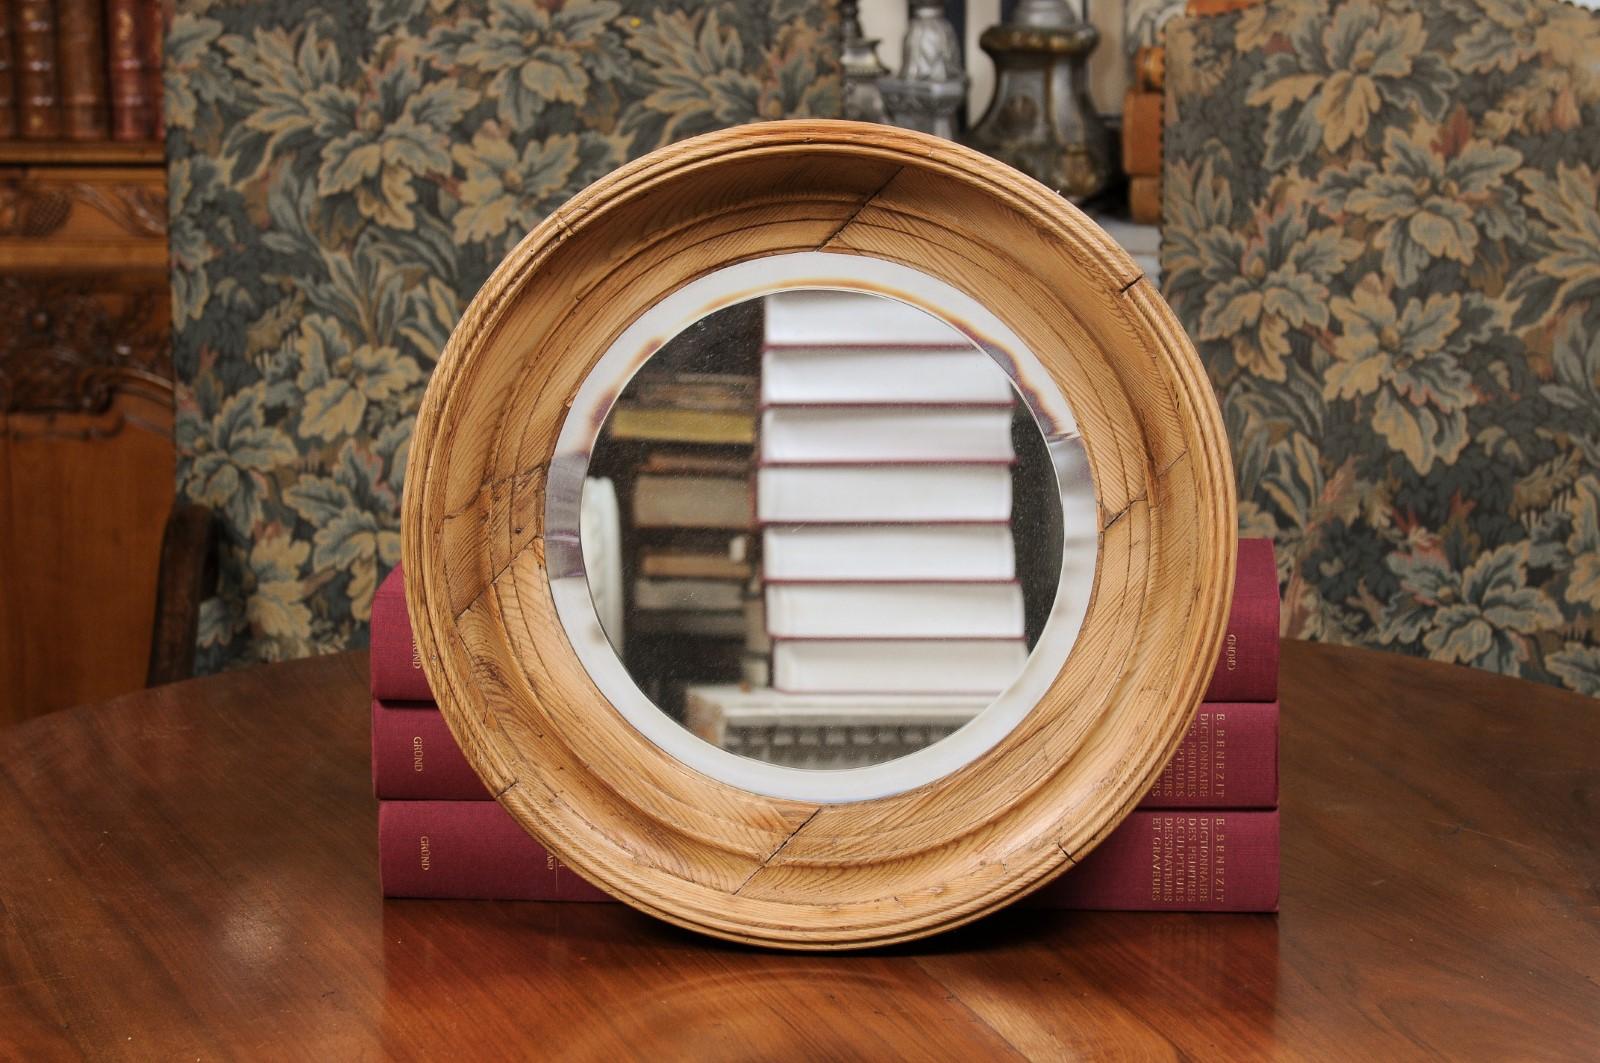 An English pine bullseye mirror from the 19th century, with natural patina and beveled glass. Created in England during the 19th century, this bullseye mirror features a pine molded circular frame surrounding a central mirror plate with beveled